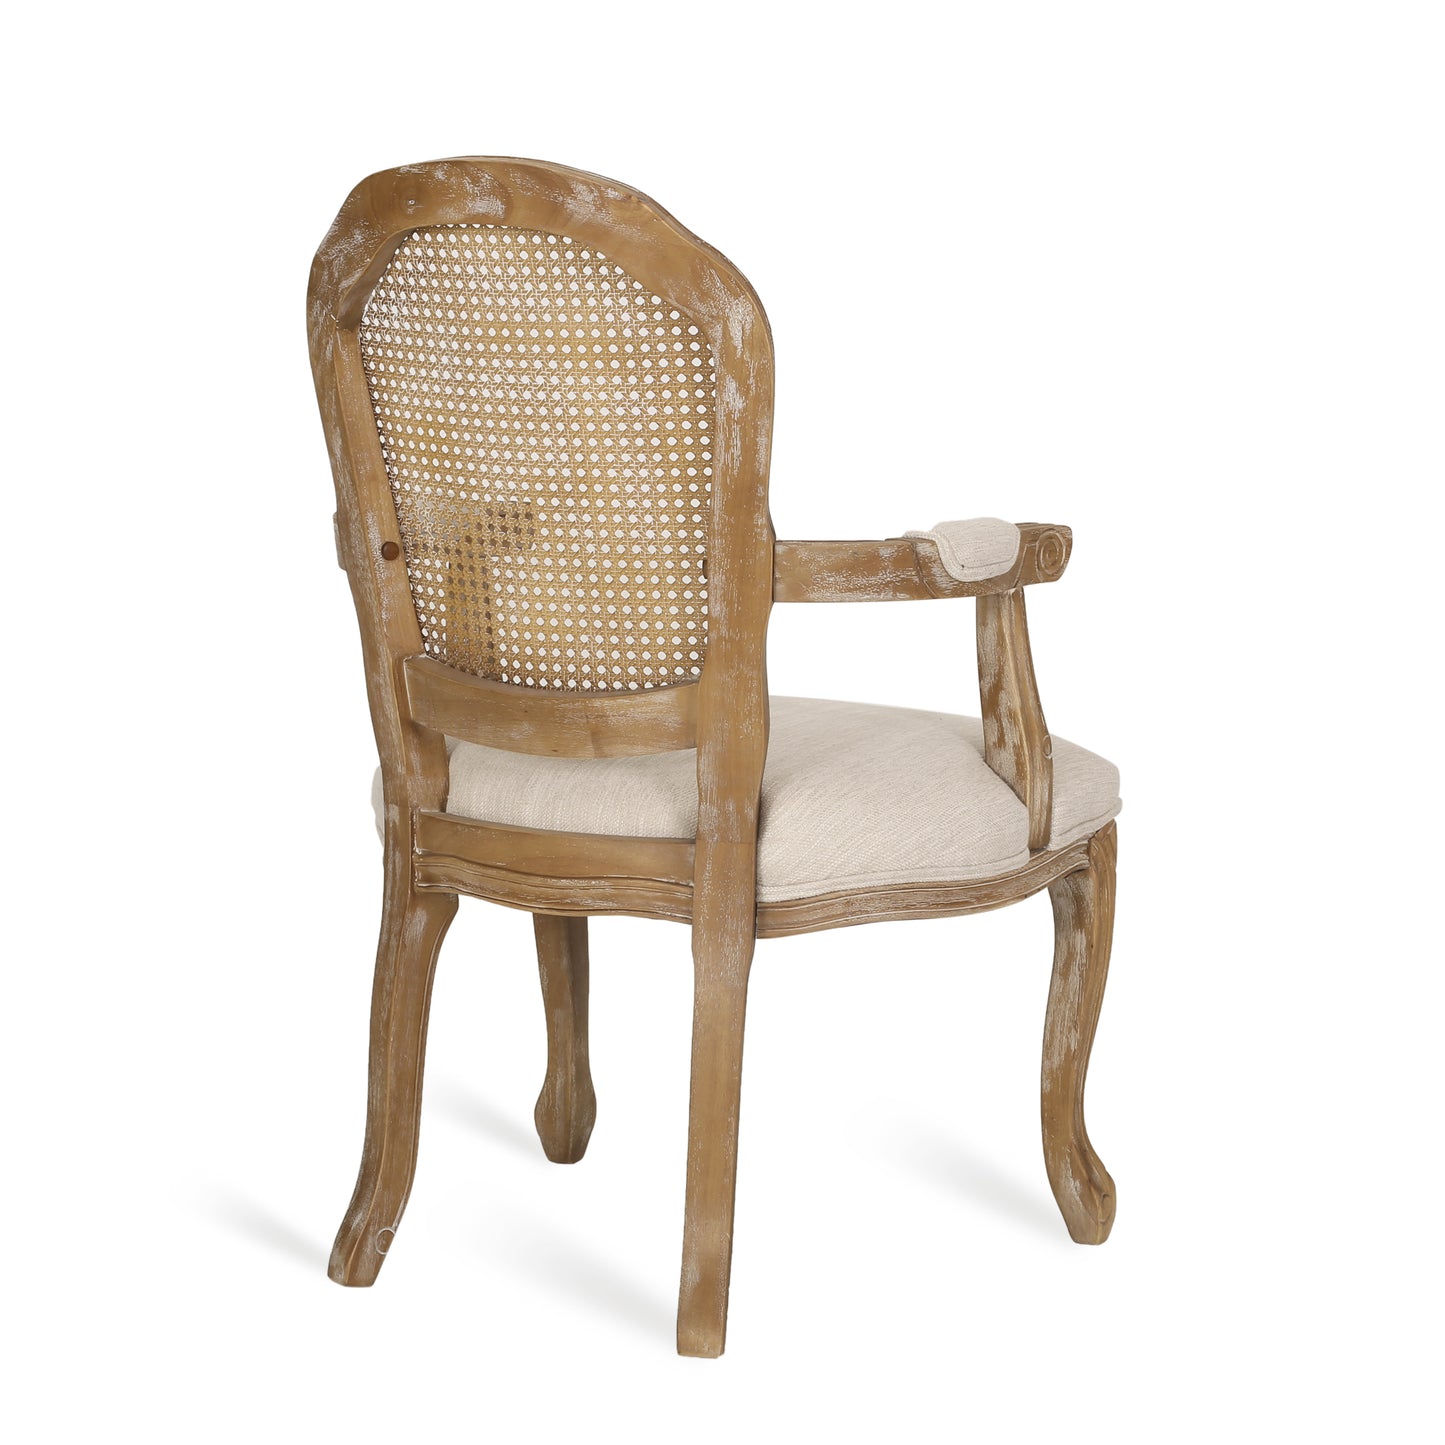 Mariette French Country Wood and Cane Upholstered Dining Chair, Set of 4